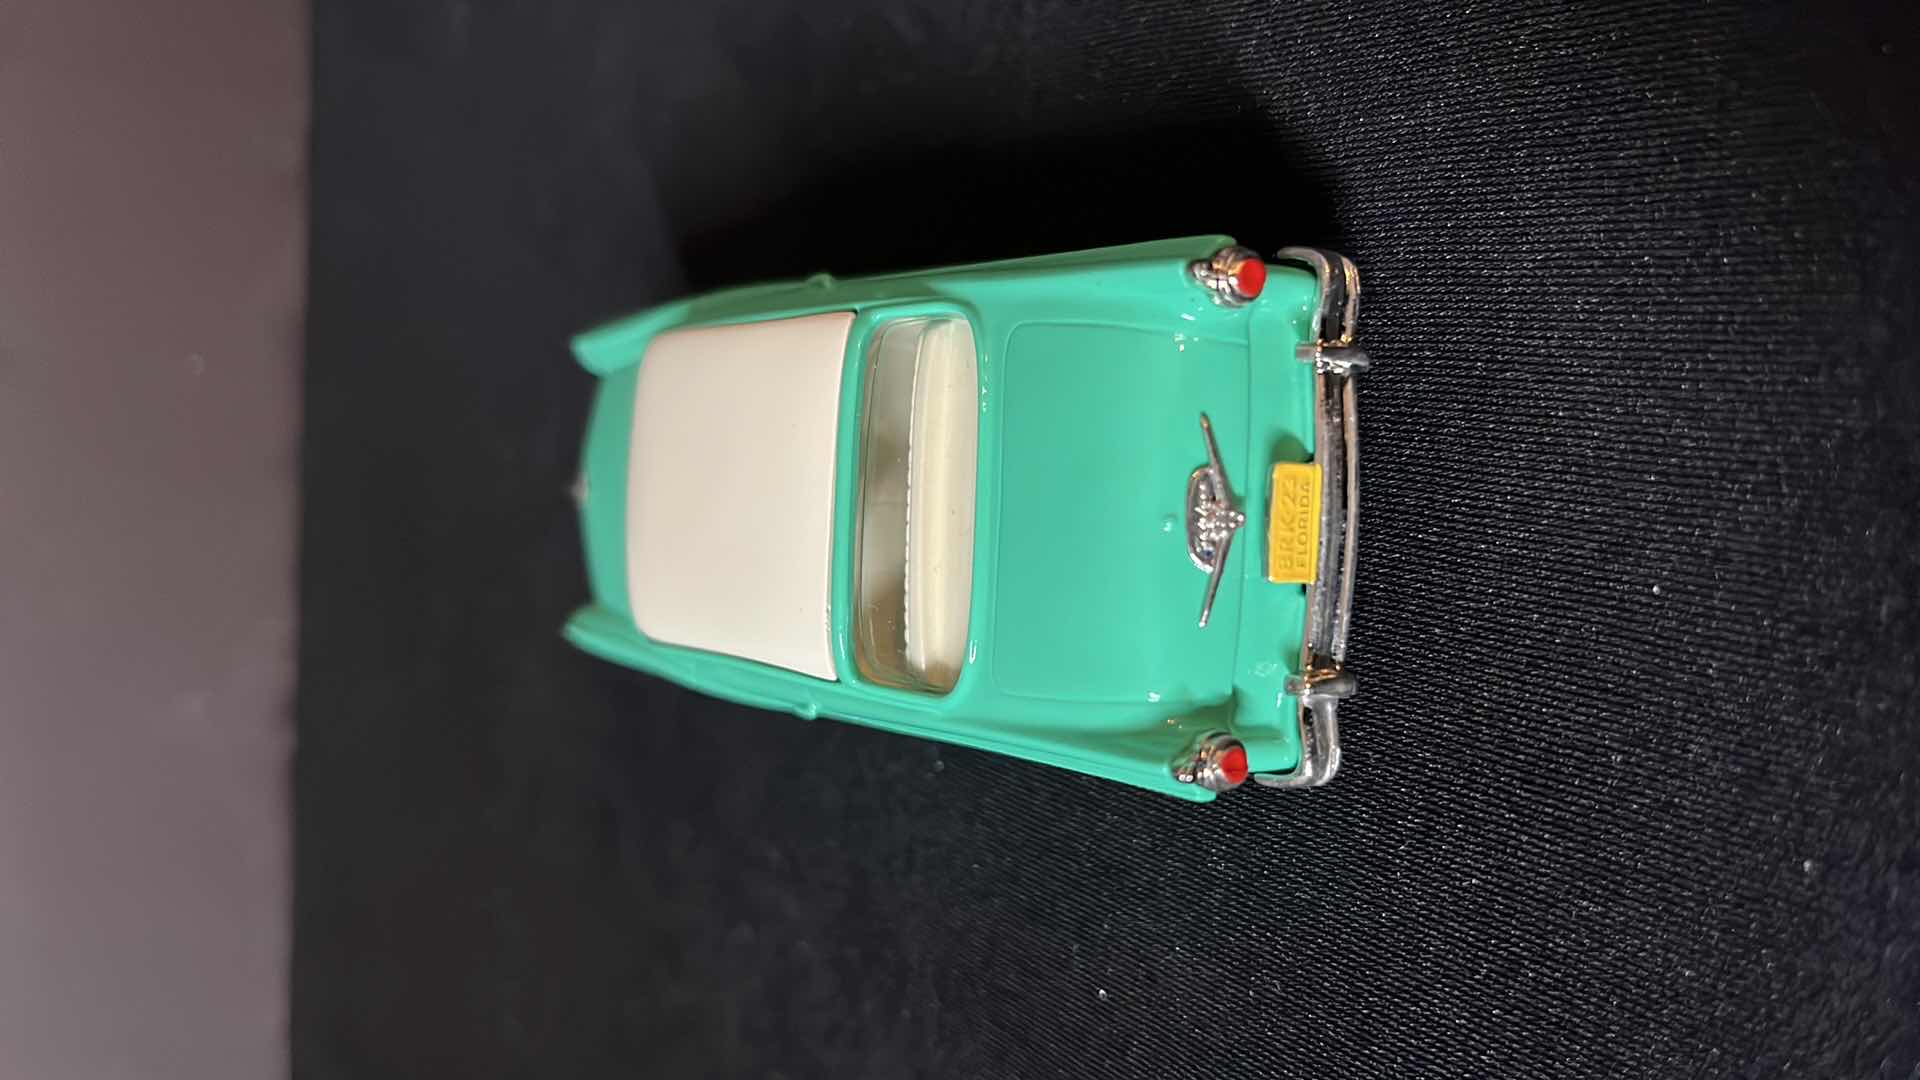 Photo 4 of VINTAGE BROOKLIN COLLECTION DIE-CAST METAL 1956 FORD FAIRLANE 2 DOOR VICTORIA, MADE IN ENGLAND (No. 23)